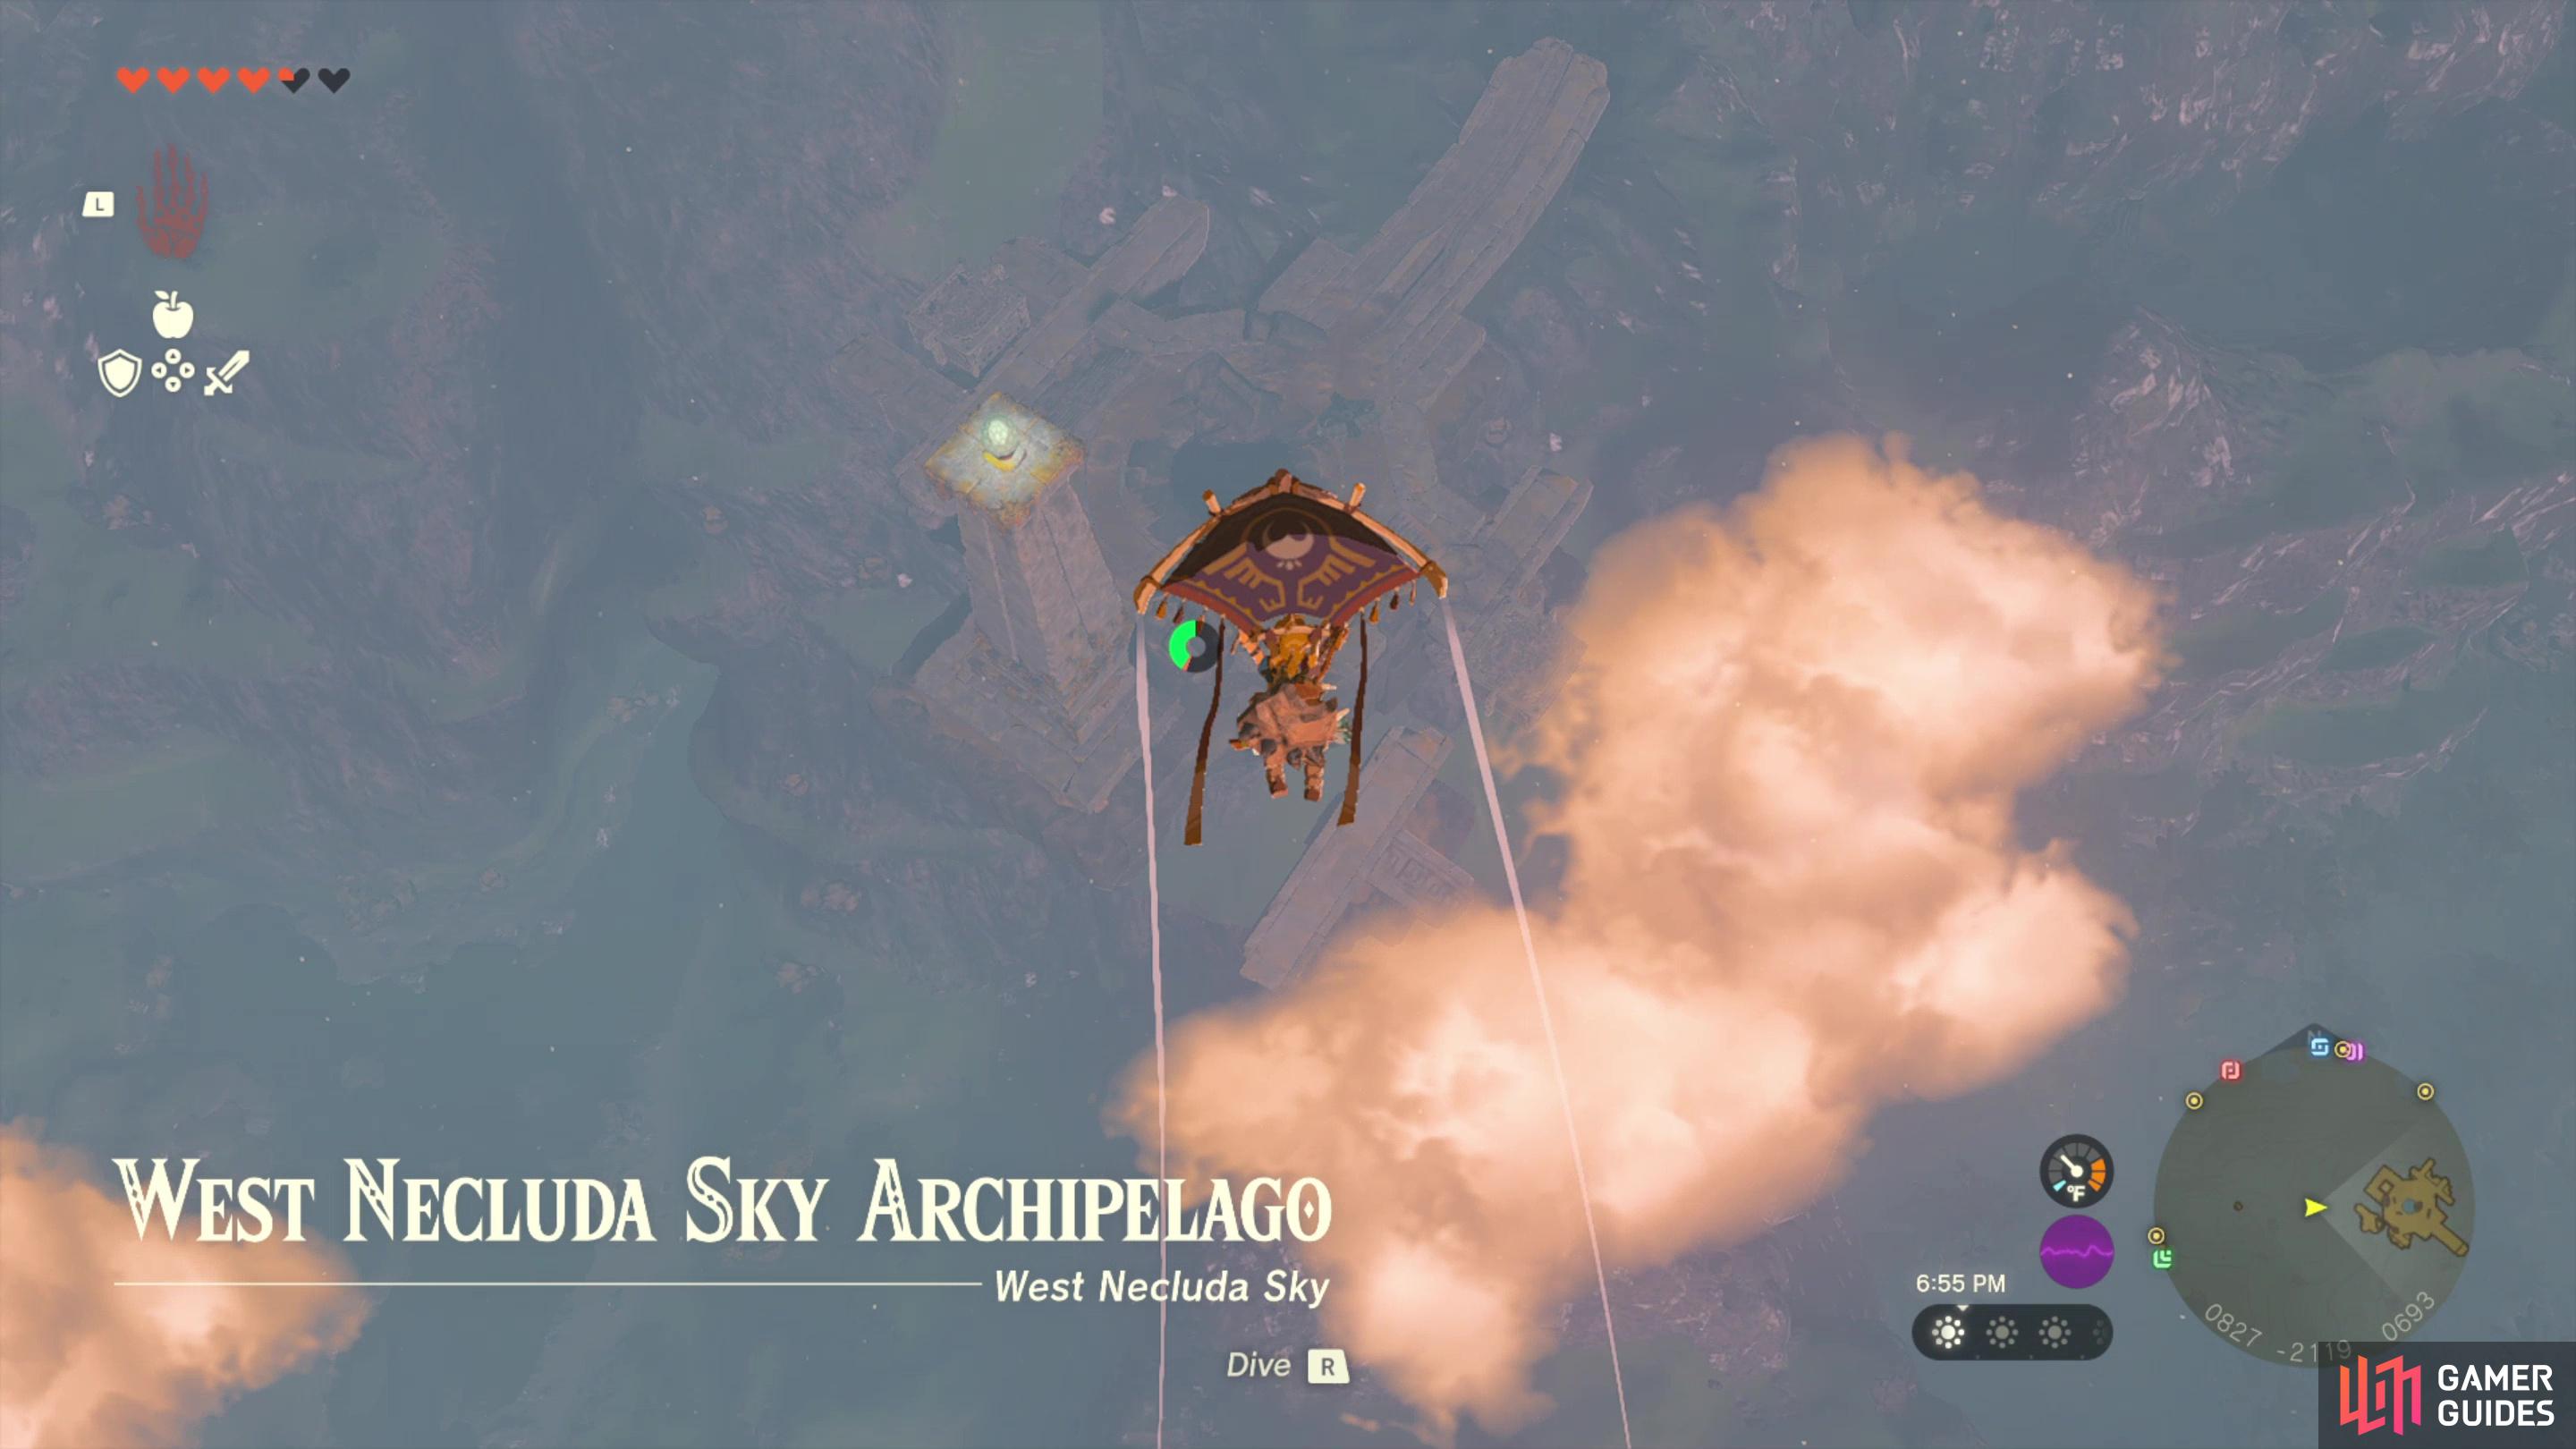 If you launch from the Popla Foothills Skyview Tower you can glide over to the West Necluda Sky Archipelago,